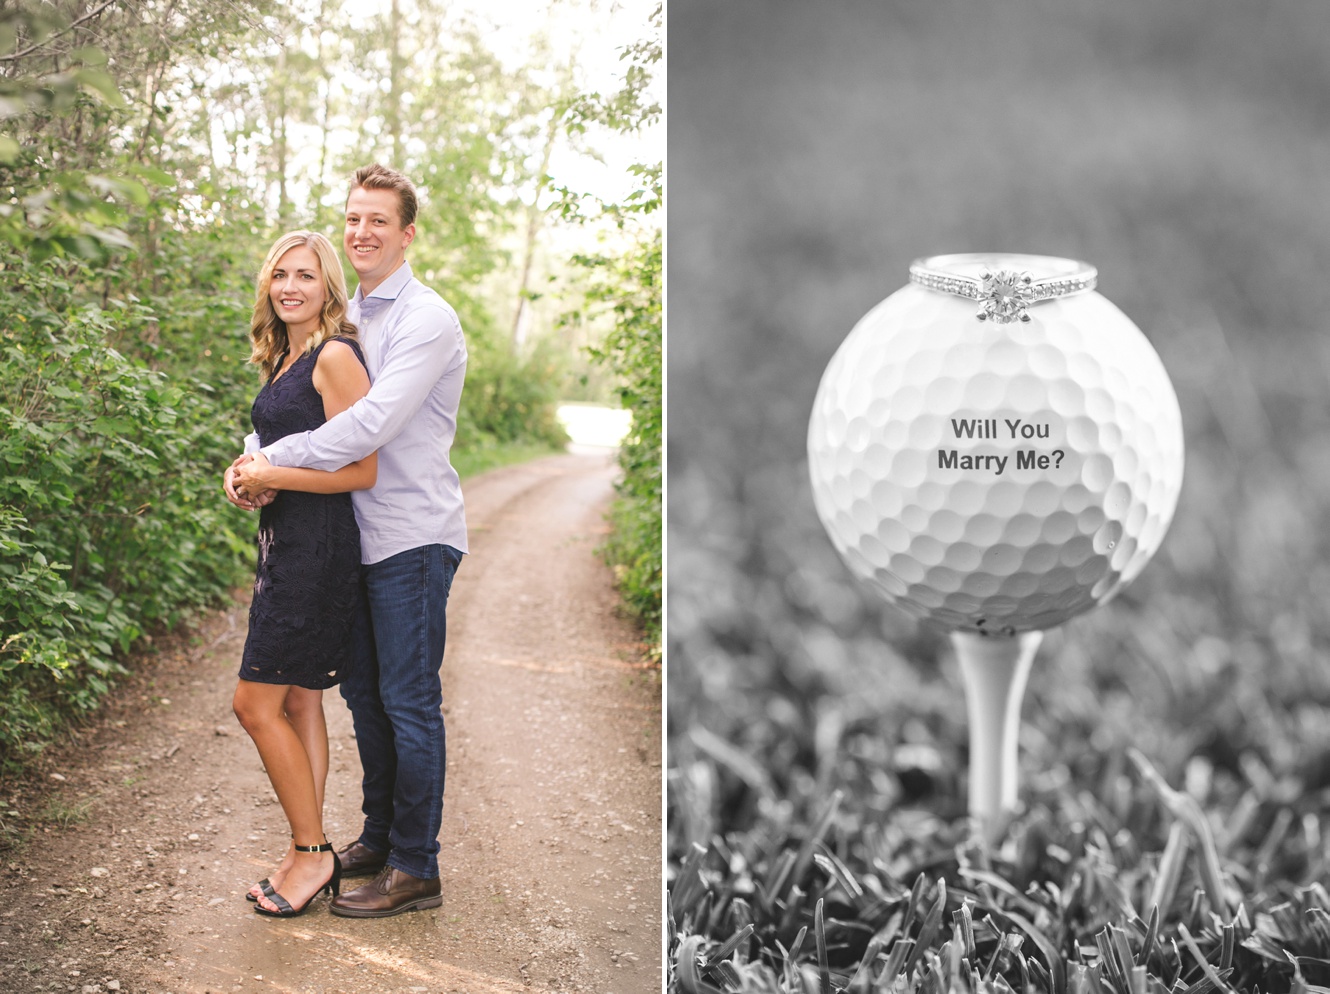 Will you marry me golf ball photo